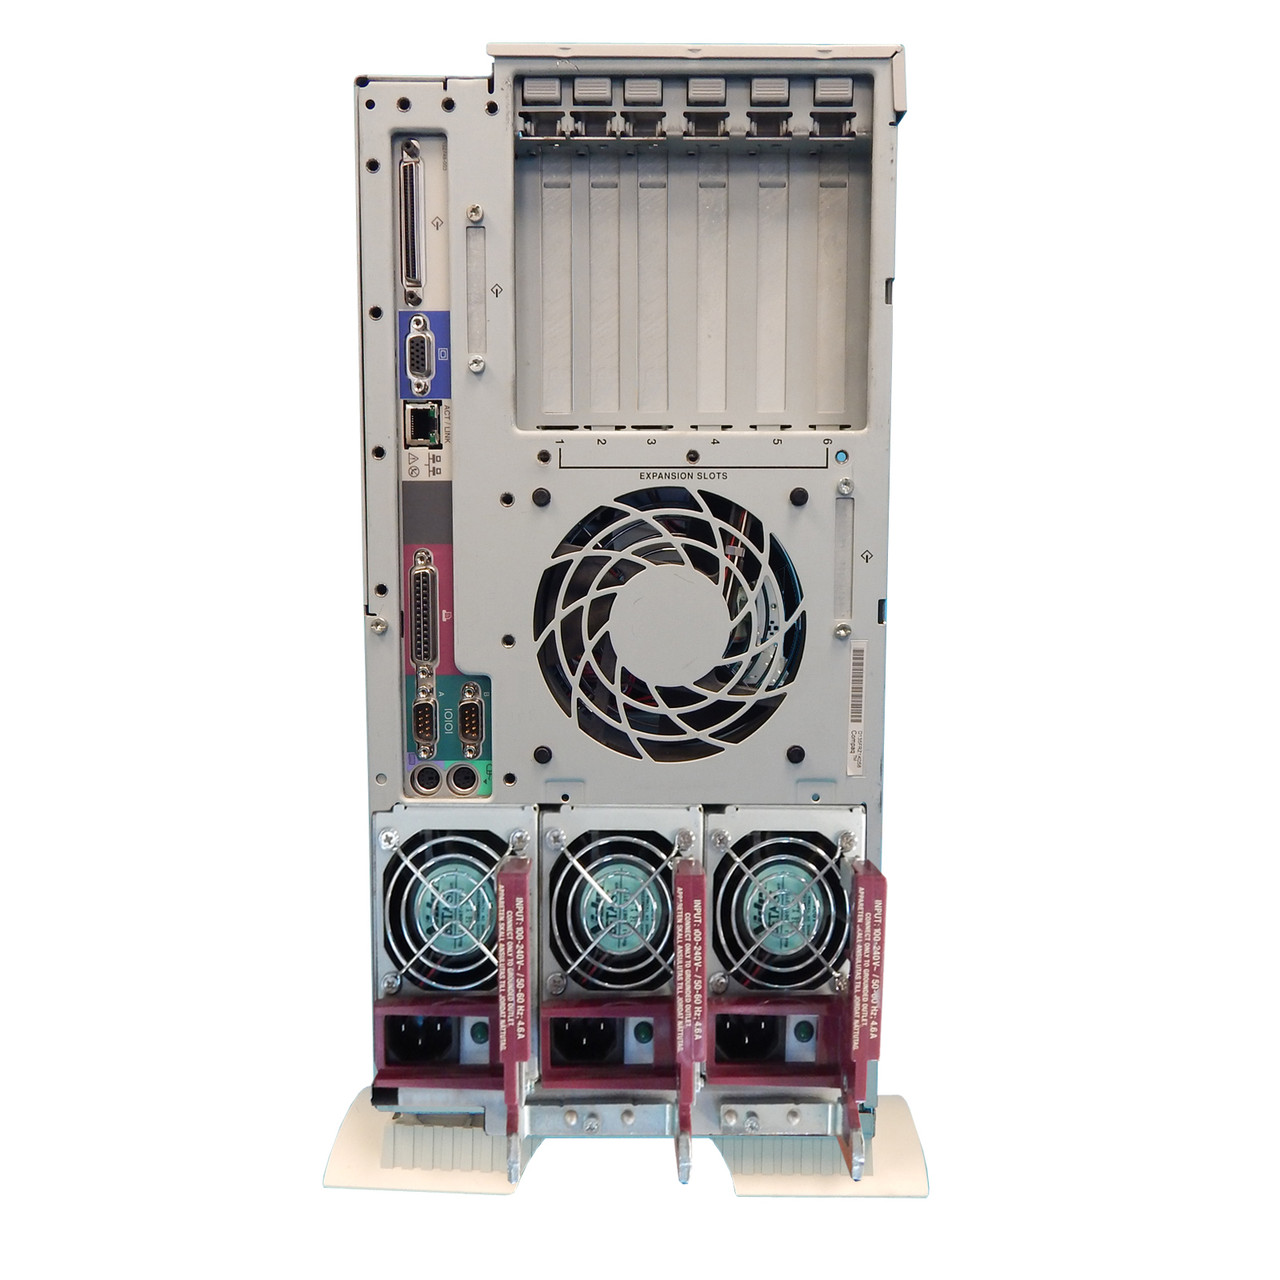 Refurbished Proliant ML370T Configure to Order Tower Server